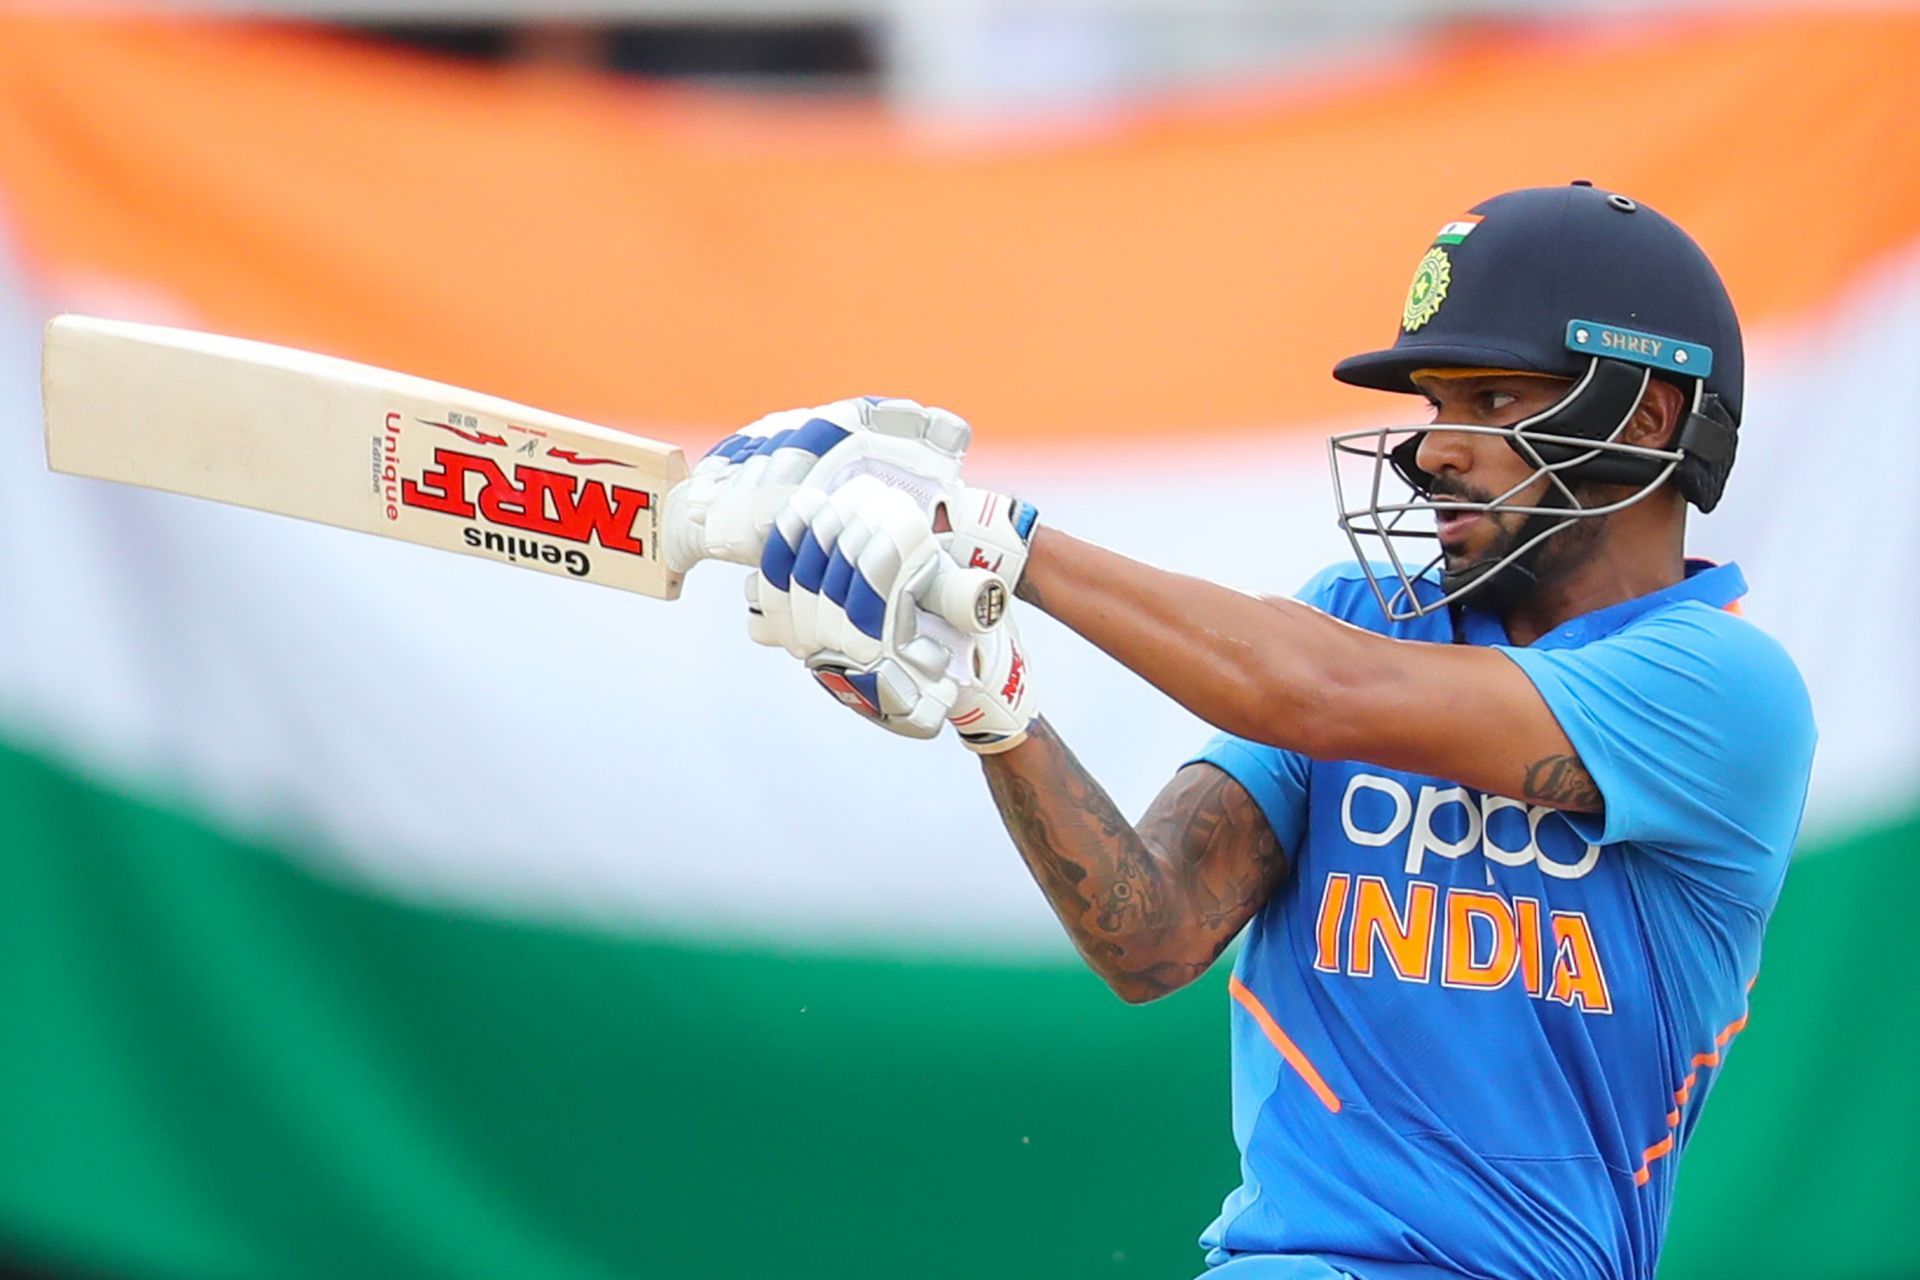 Shikhar Dhawan is known for raising his game in ICC events